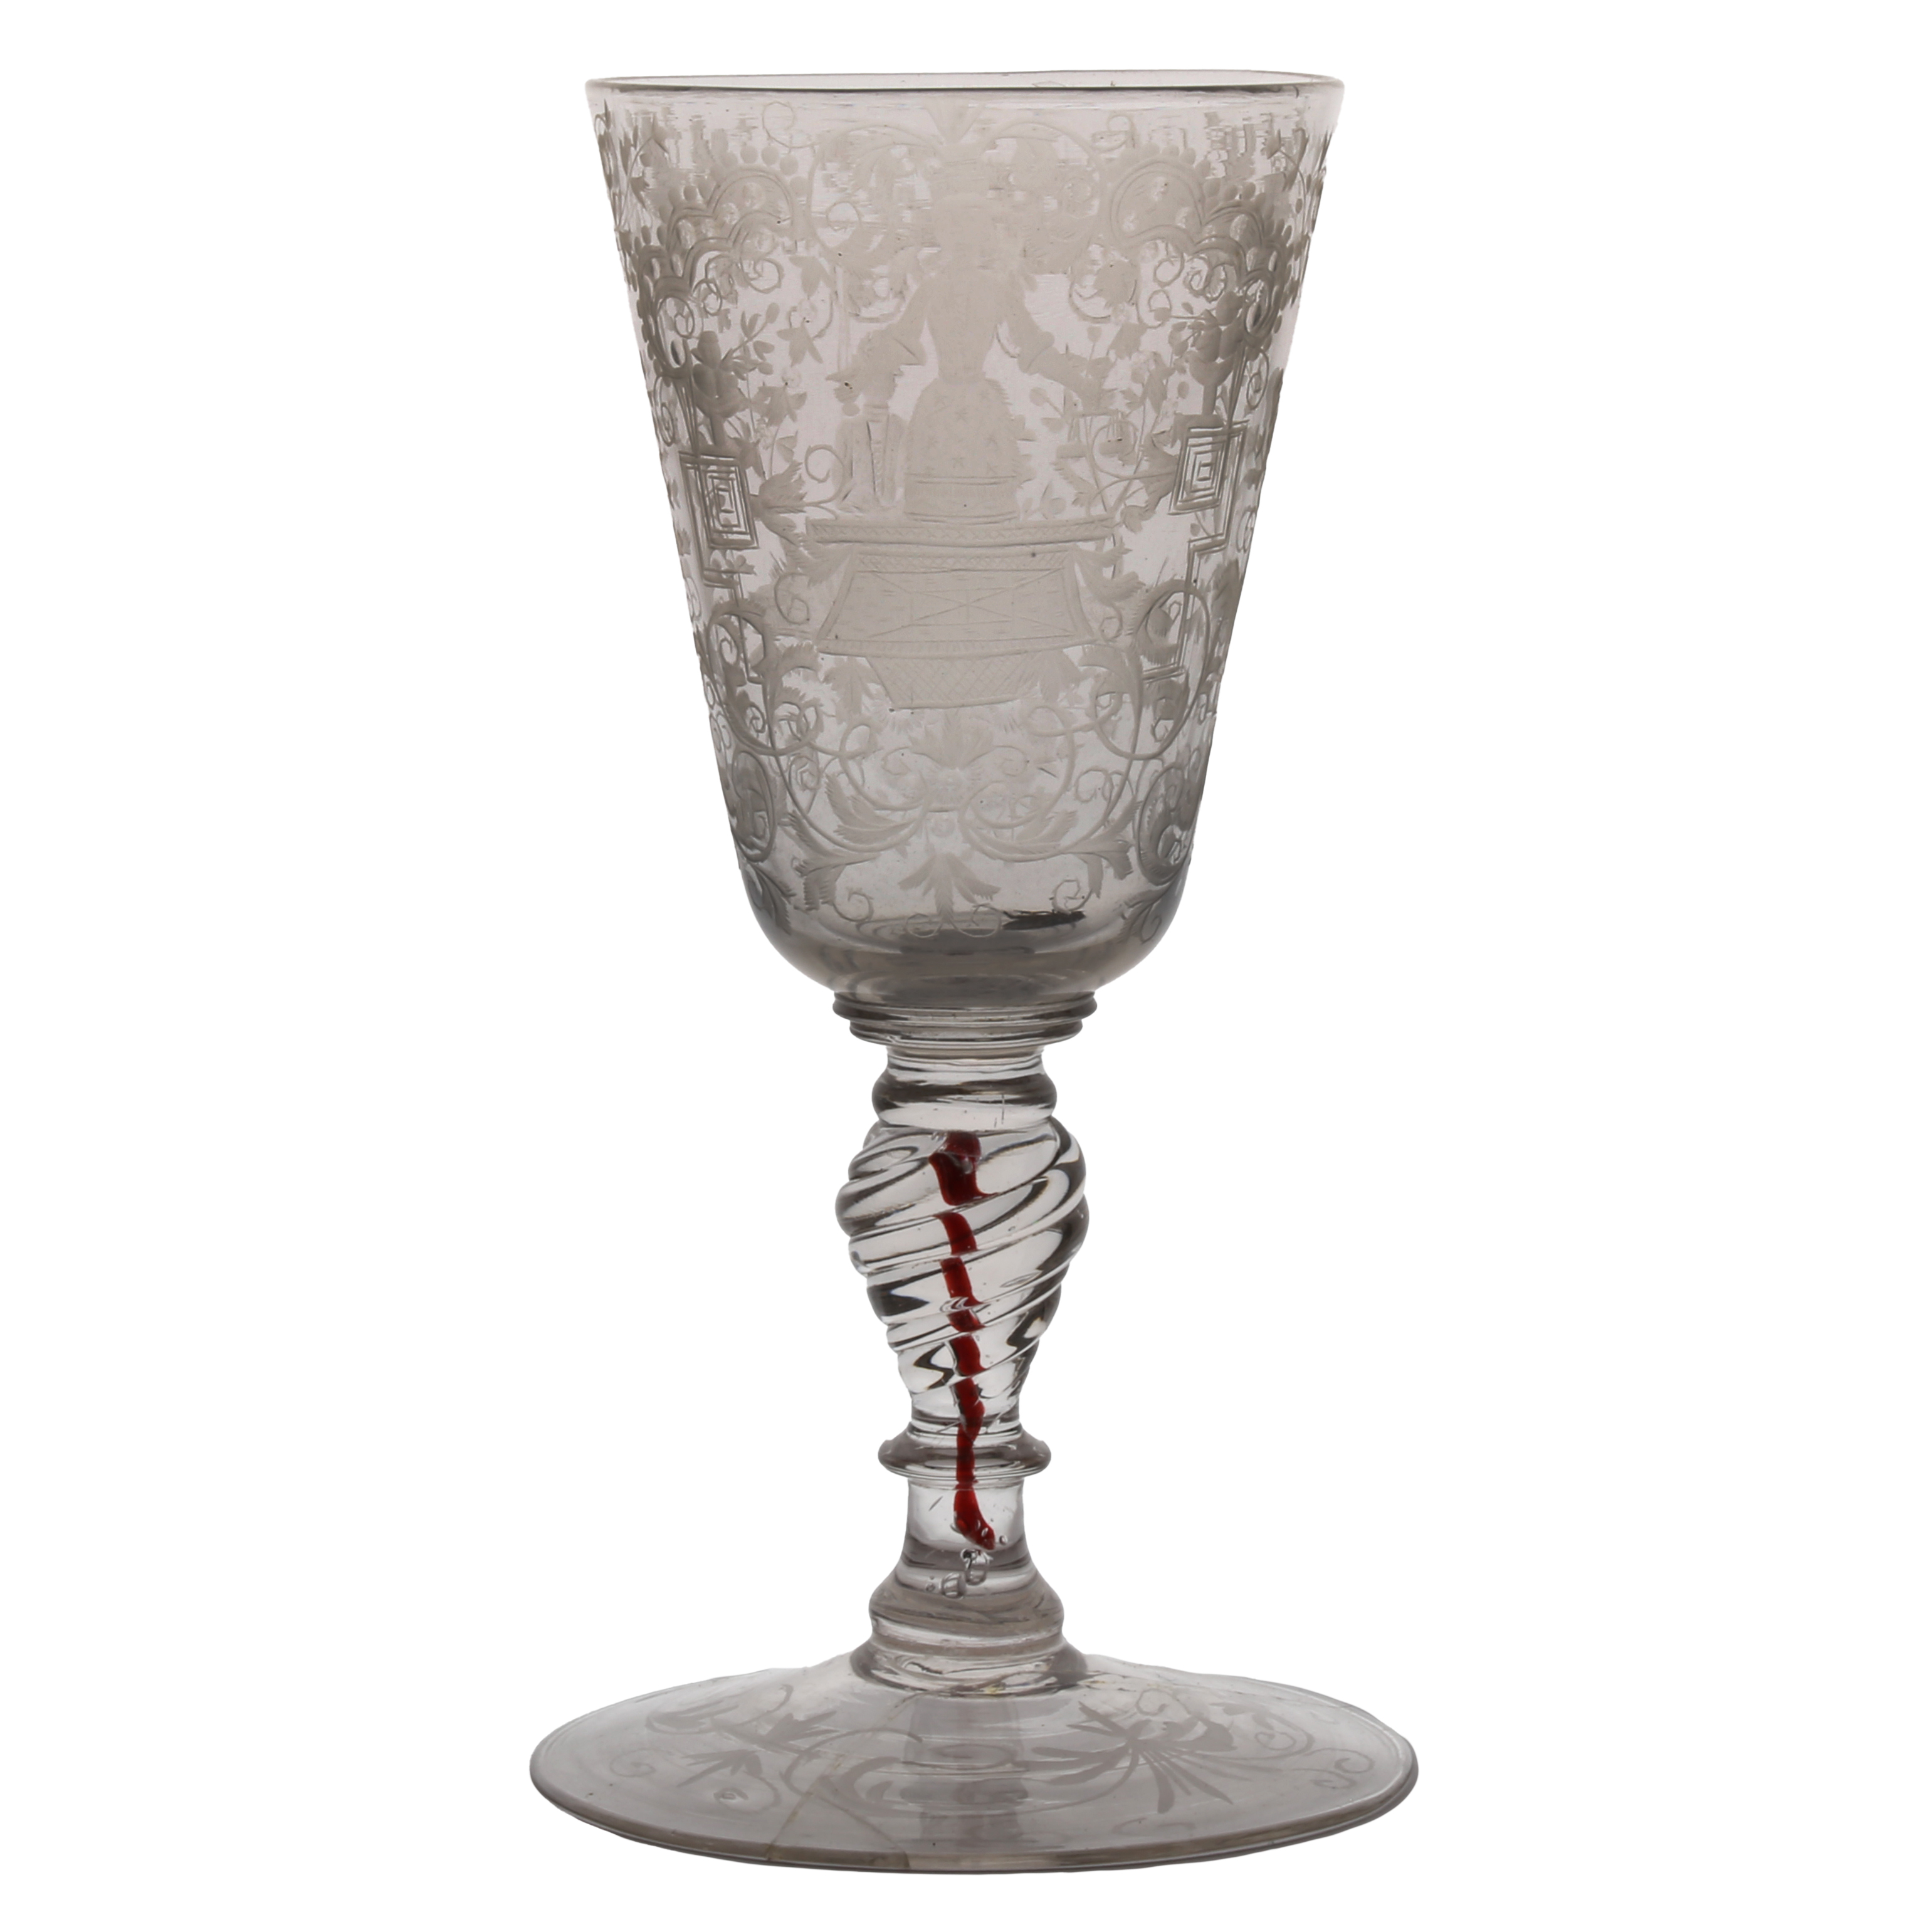 An 18th Century Bohemian engraved goblet, with engraved decoration showing figures among swags, a - Image 2 of 2